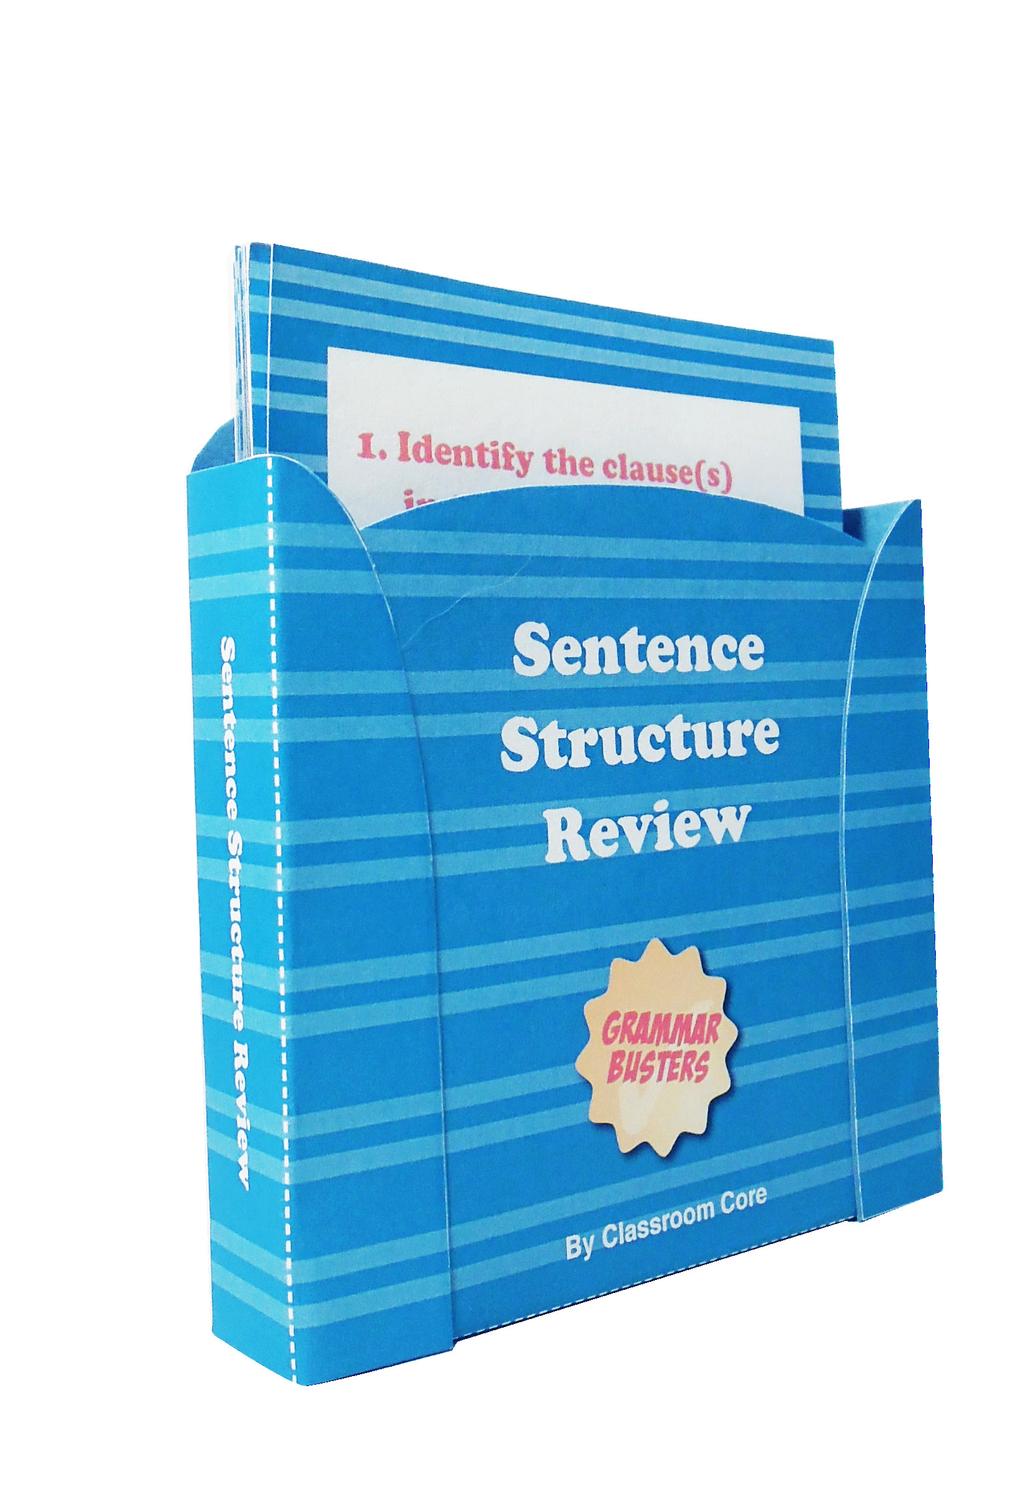 Sentence Structure Review 40 Task Cards Plus Quiz By Classroom Core Grades 6 8 Aligned to CCSS 40 Task Cards Storage Case Template Quiz Student Recording Sheet Instructions & Answer Key 2013 by